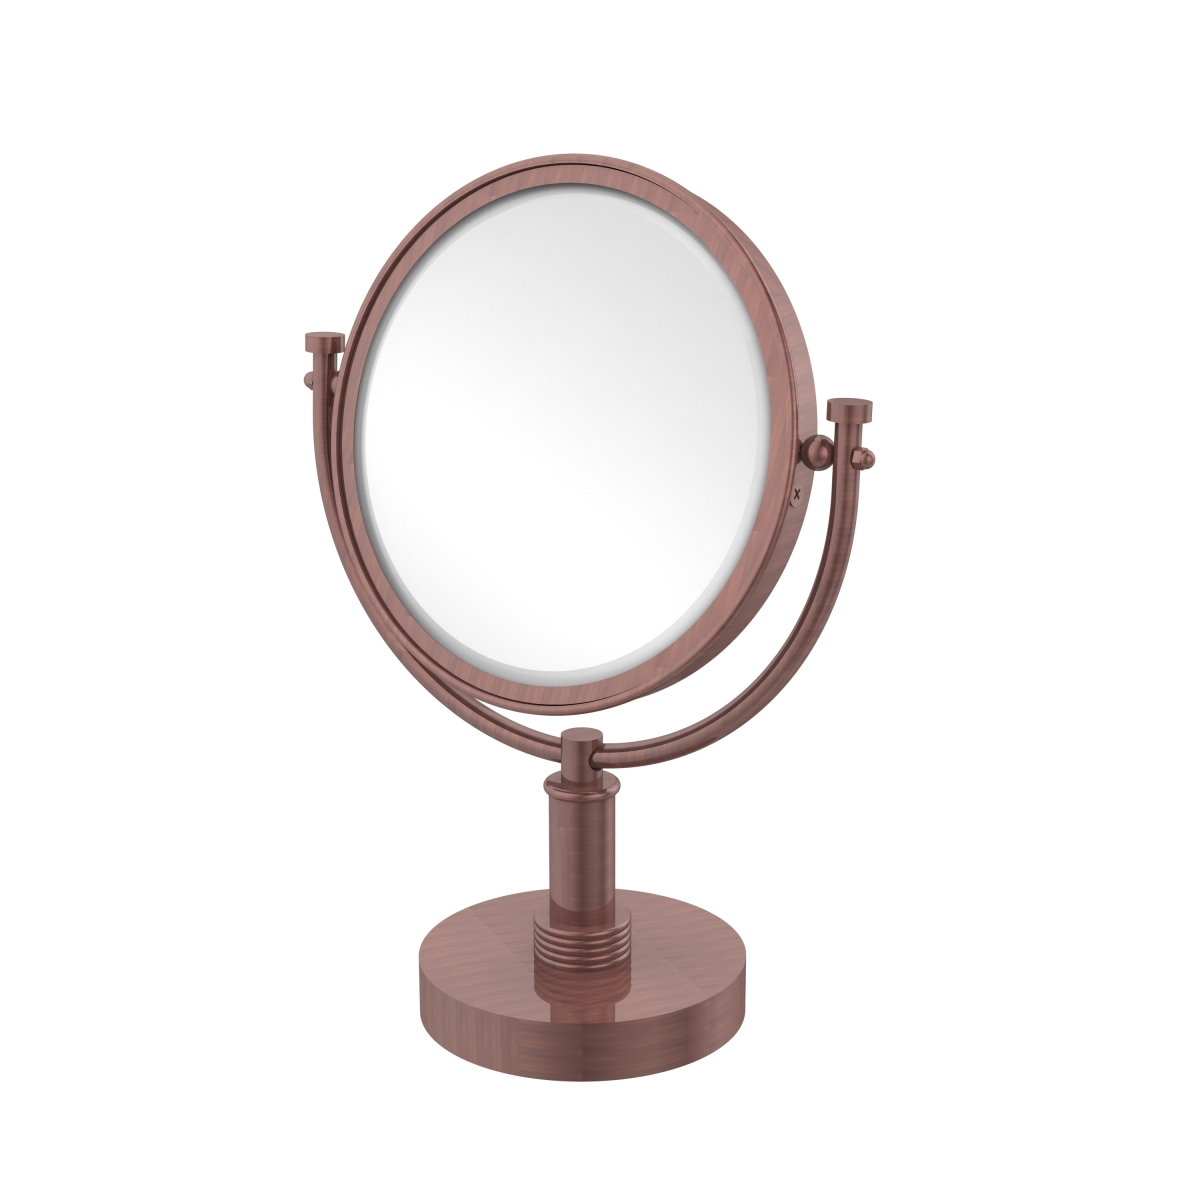 Picture of Allied Brass DM-4G-2X-CA 8 in. Vanity Top Make-Up Mirror 2X Magnification, Antique Copper - 15 x 8 x 8 in.